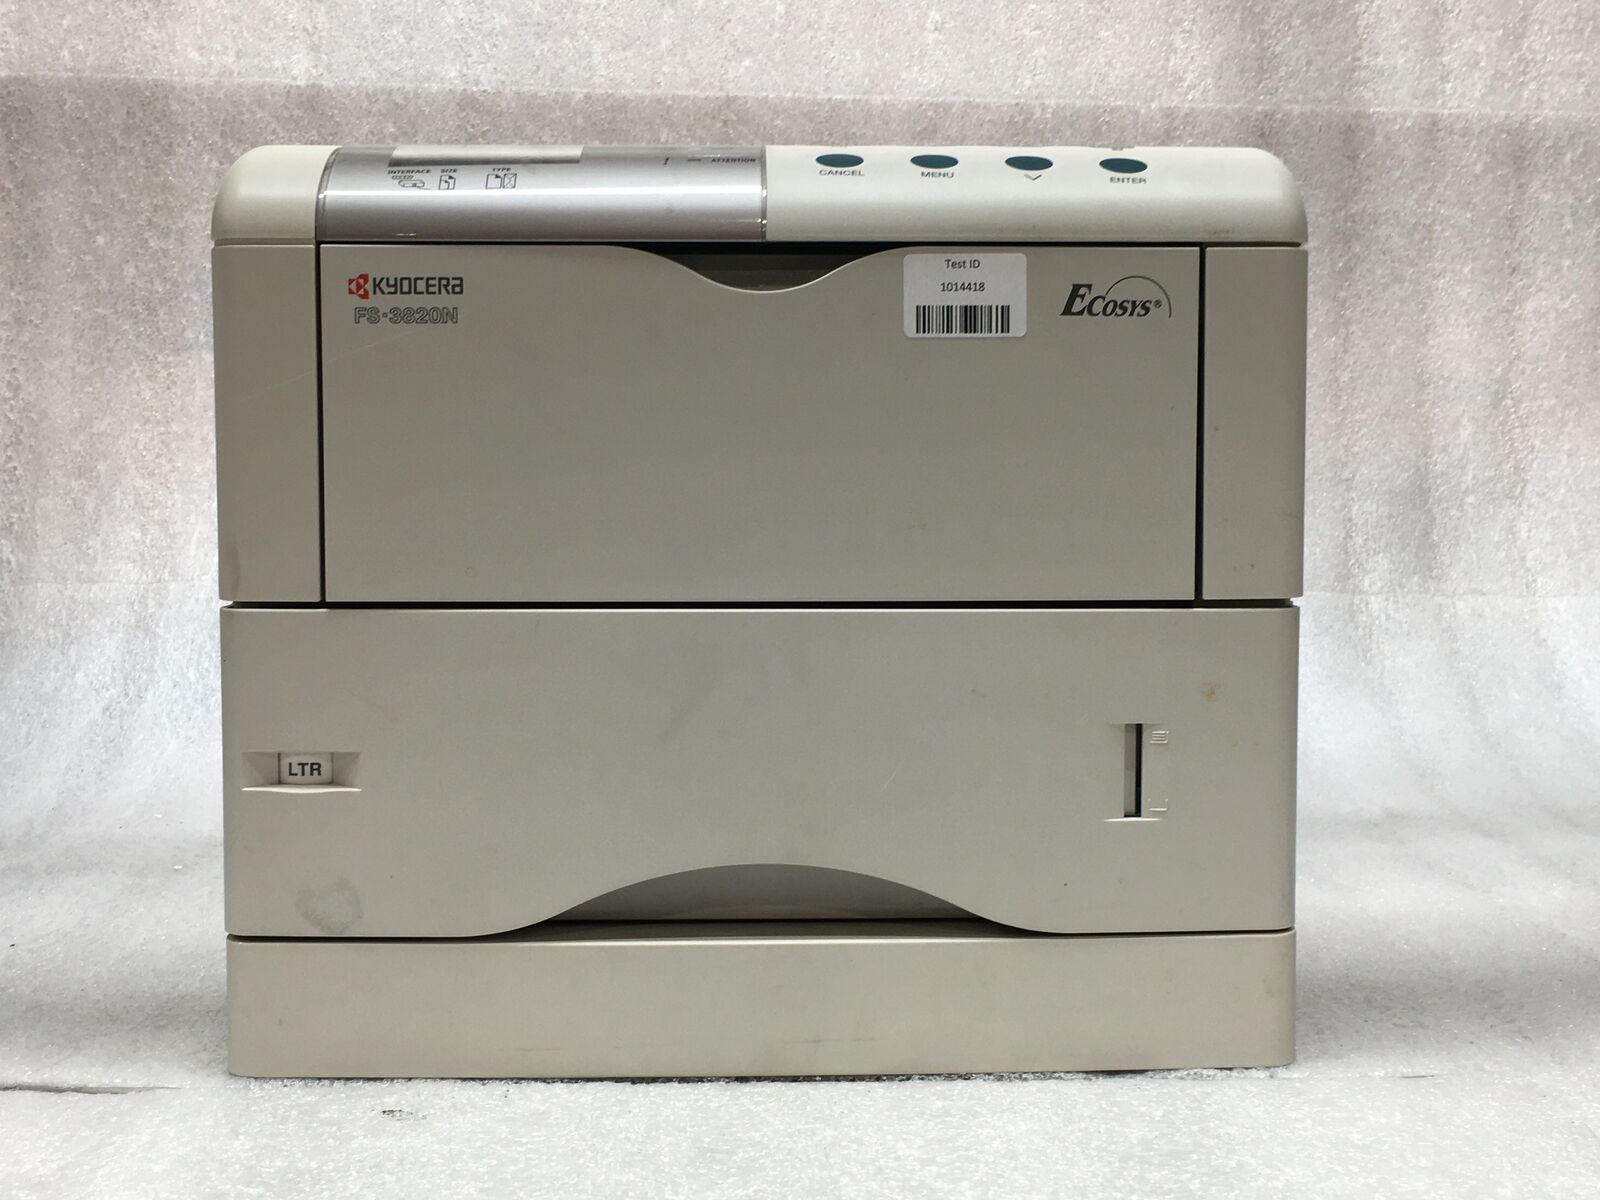 Kyocera FS-3820N Ecosys Monochrome Laser Printer with TONER and Cables